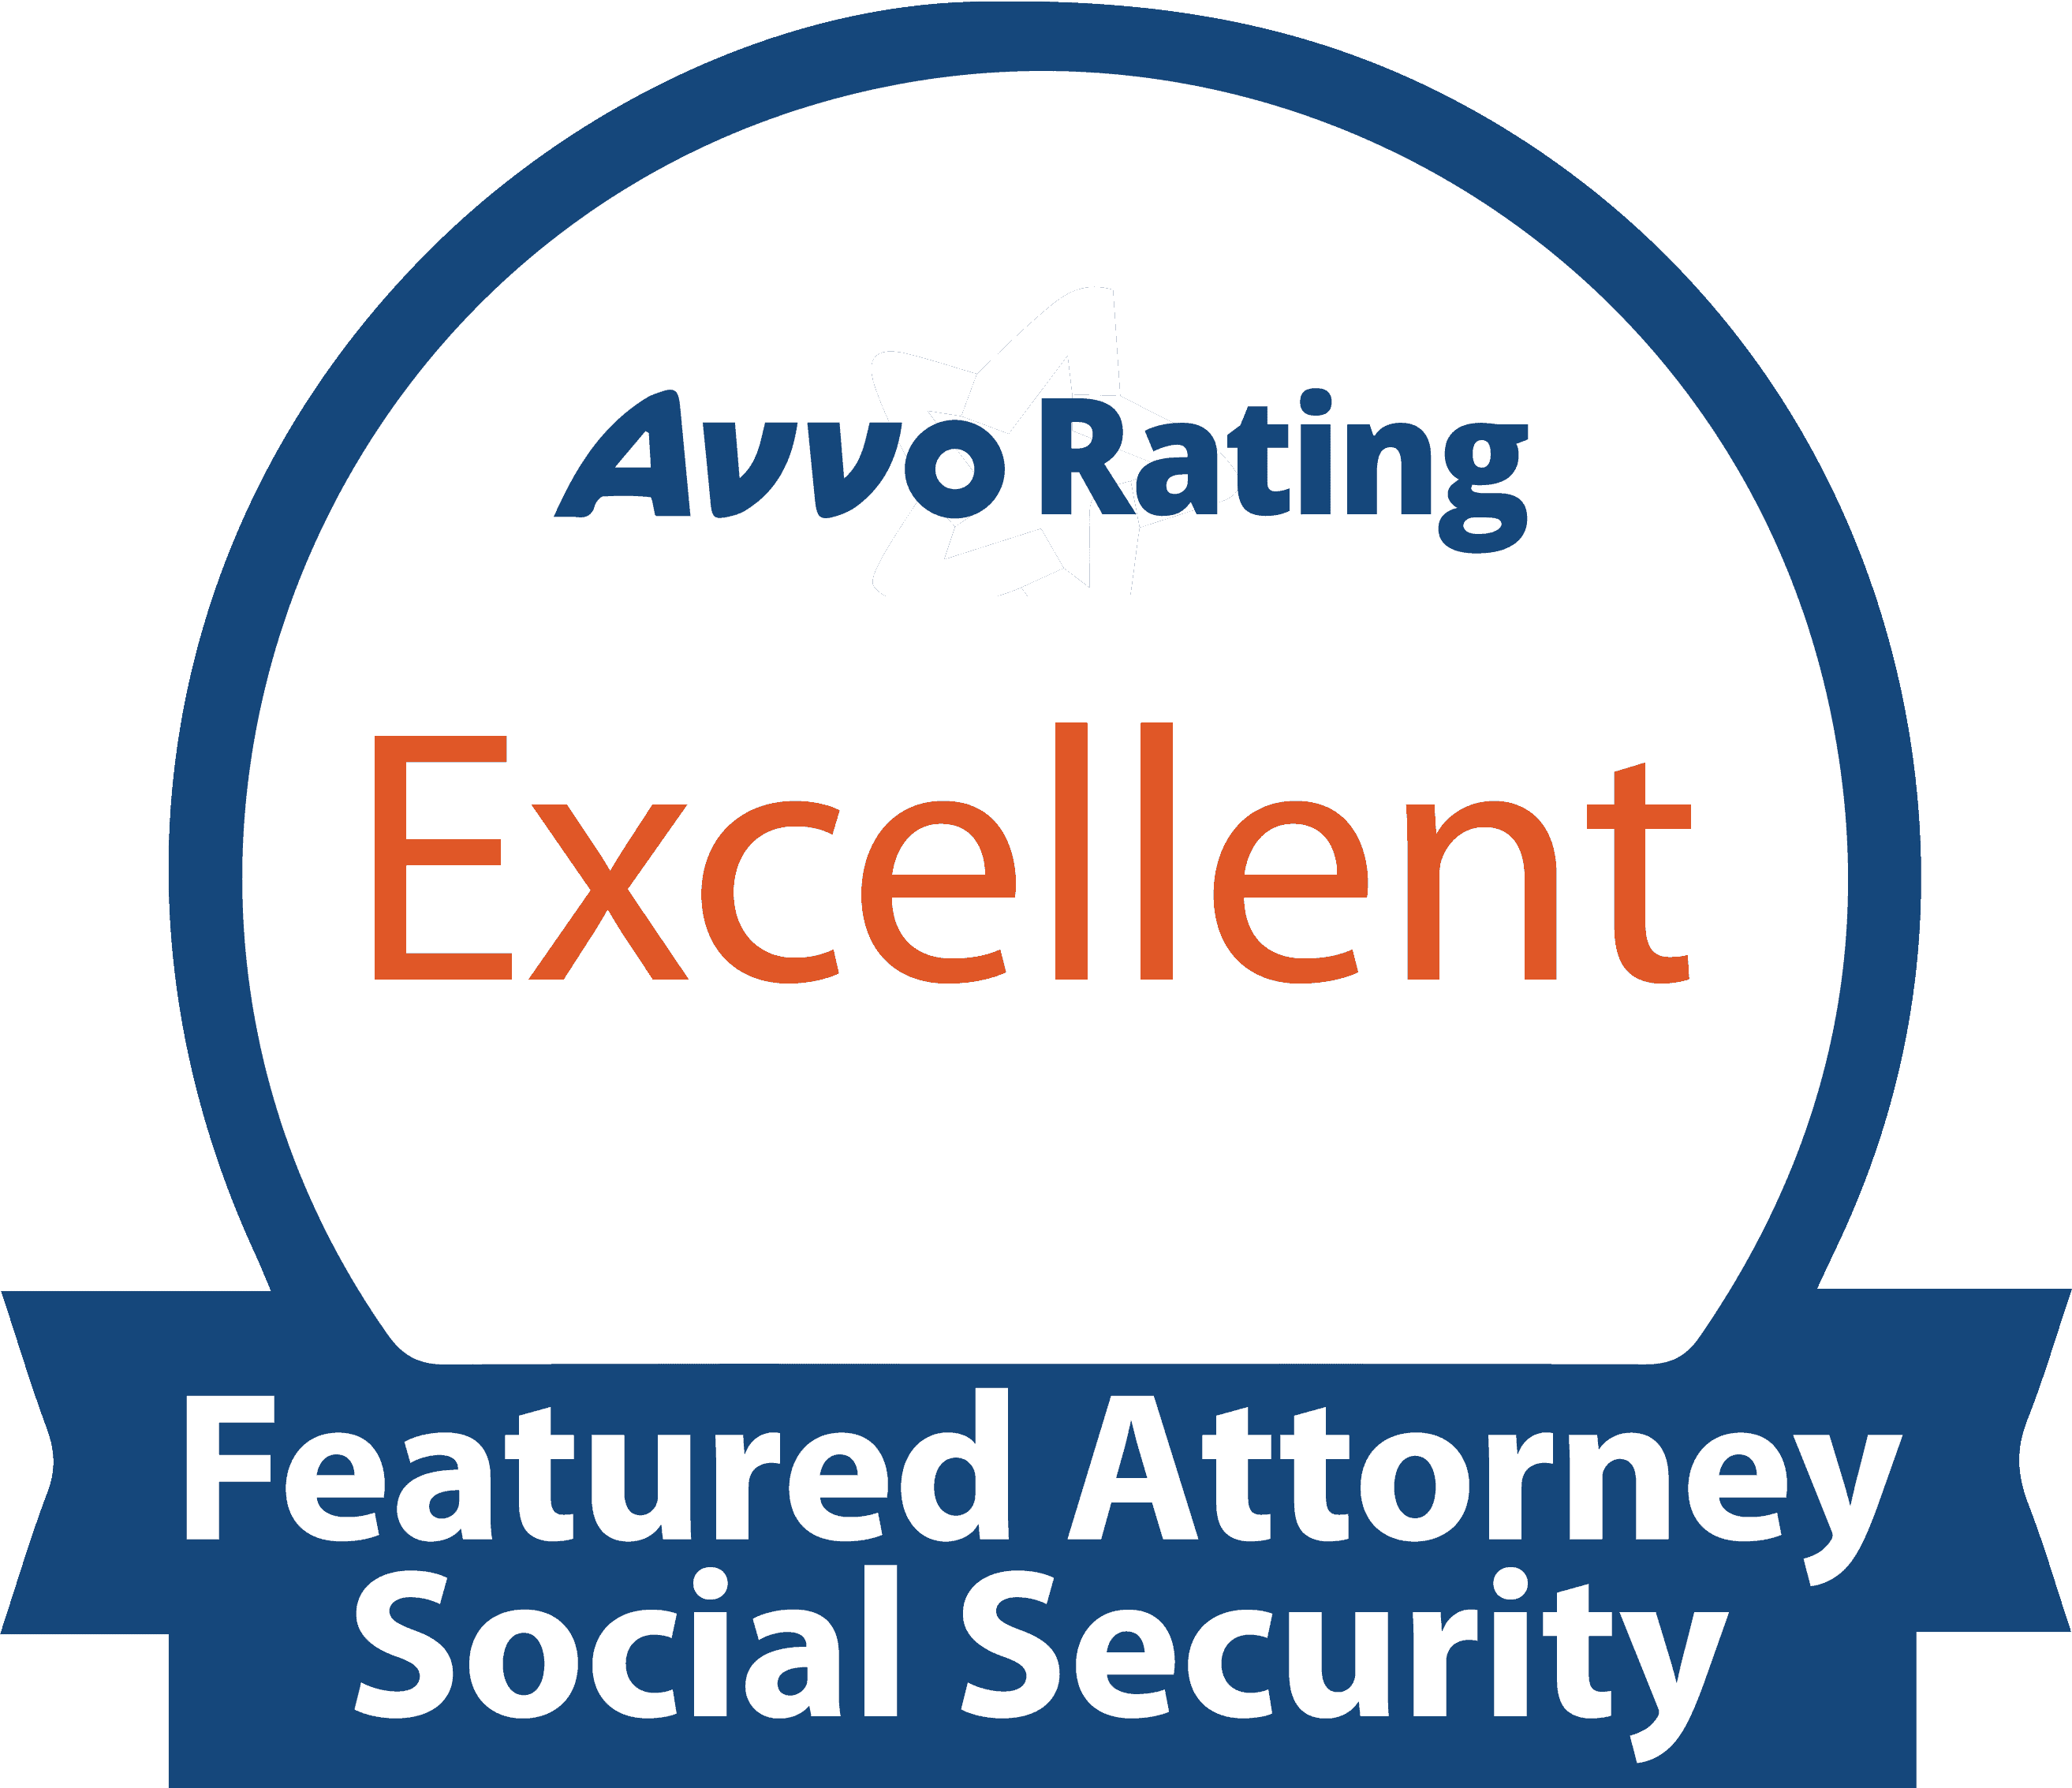 Avvo rating excellent featured attorney social security logo